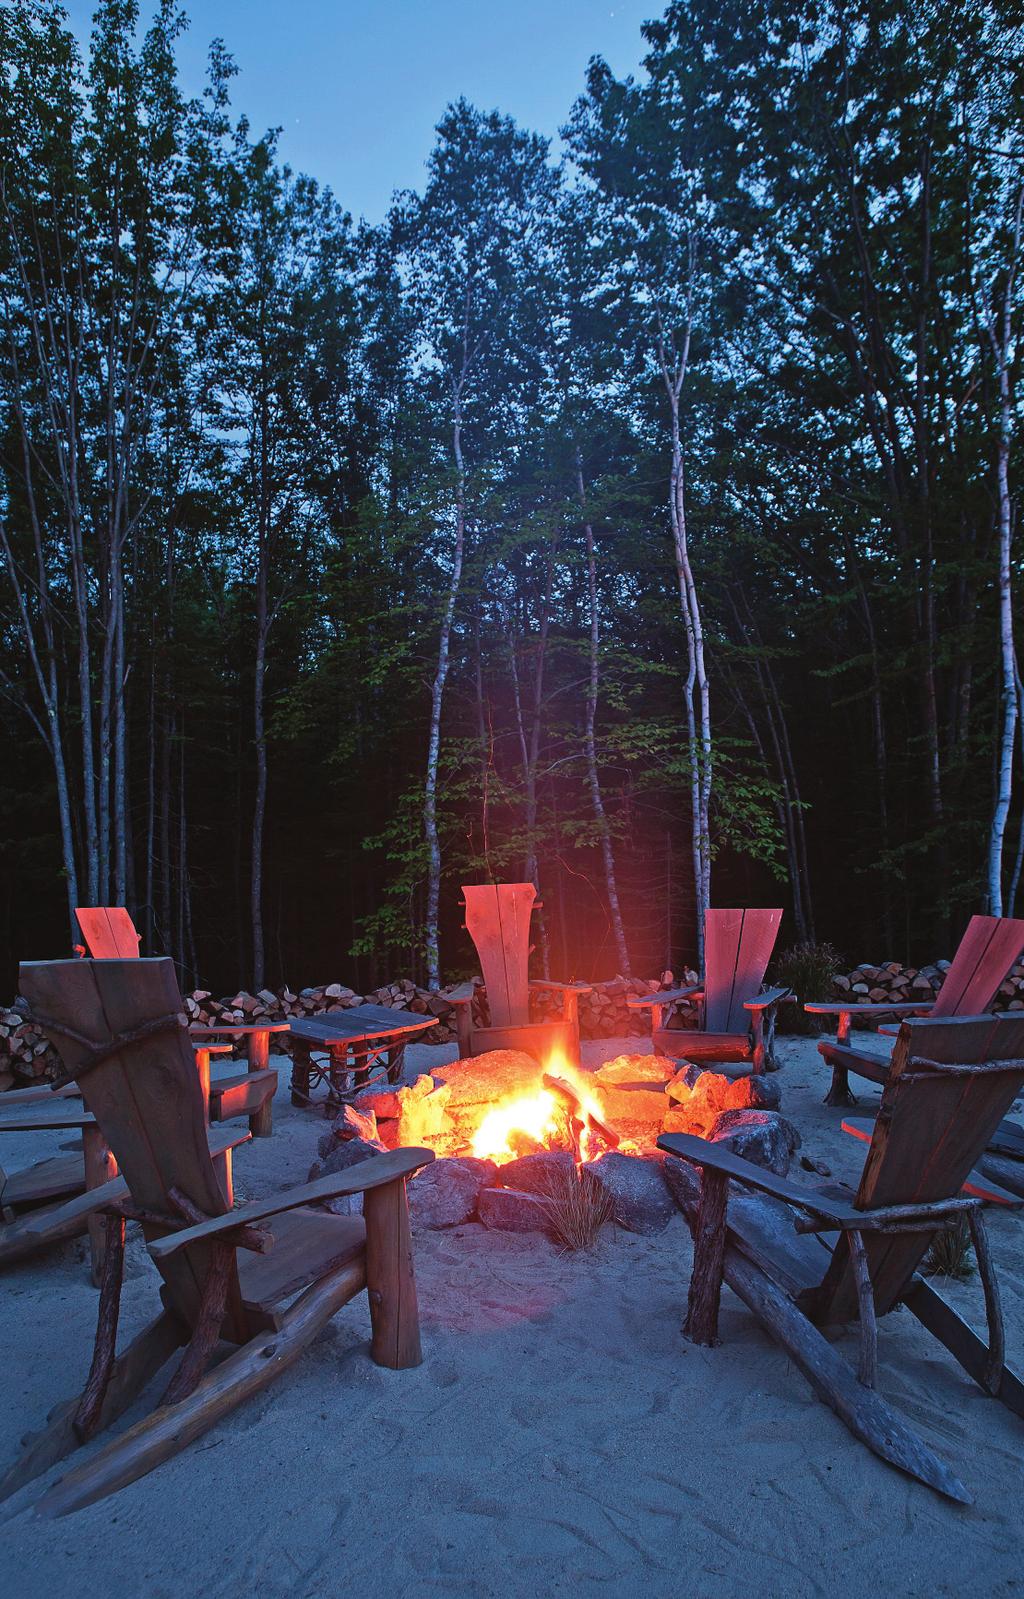 Travel Hidden Pond, Kennebunkport, ME GUT TER CREDIT Reclaim the glory days of summer camp at this 60-acre resort, with amenities like Frette sheets, stone fireplaces and outdoor showers.